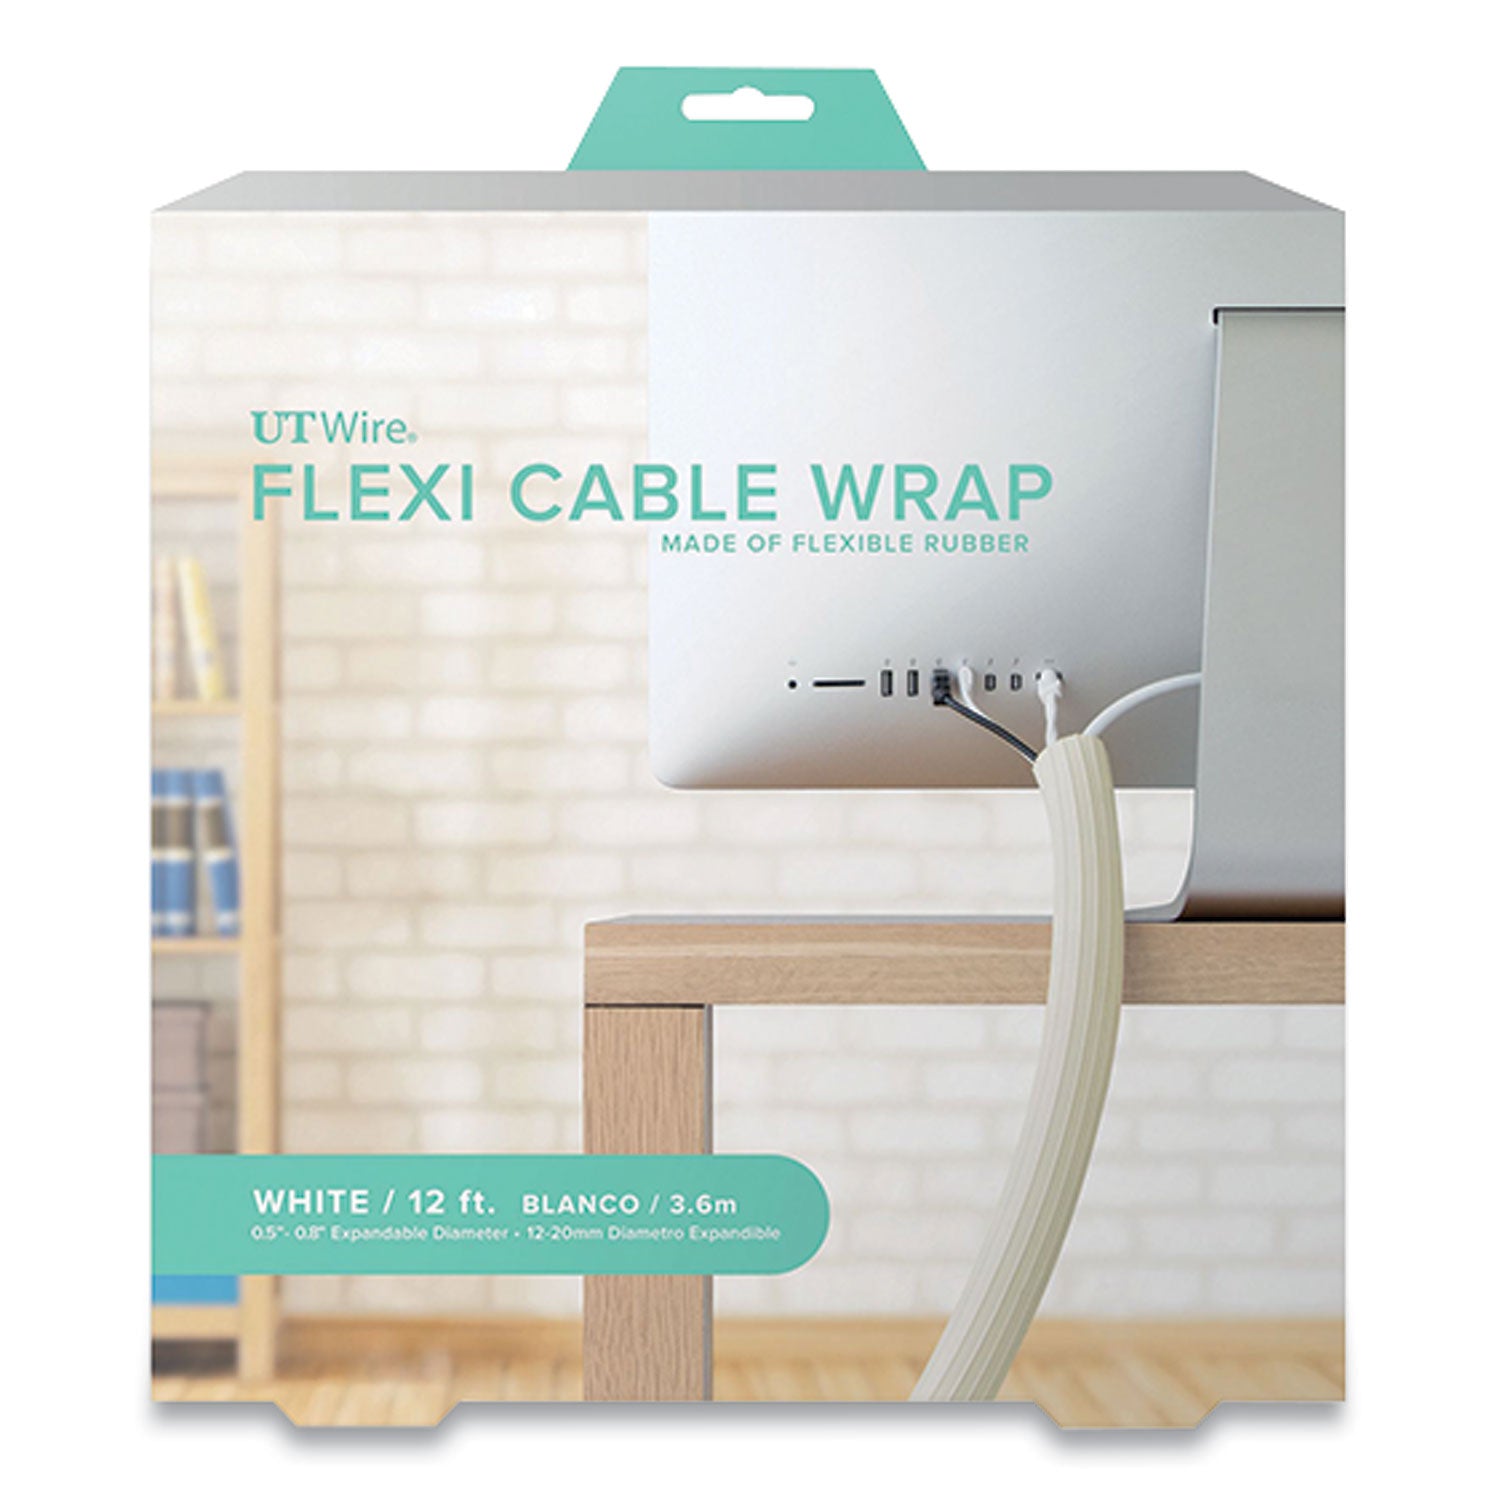 flexi-cable-wrap-05-to-1-x-12-ft-white_rboutwfcw12wh - 1